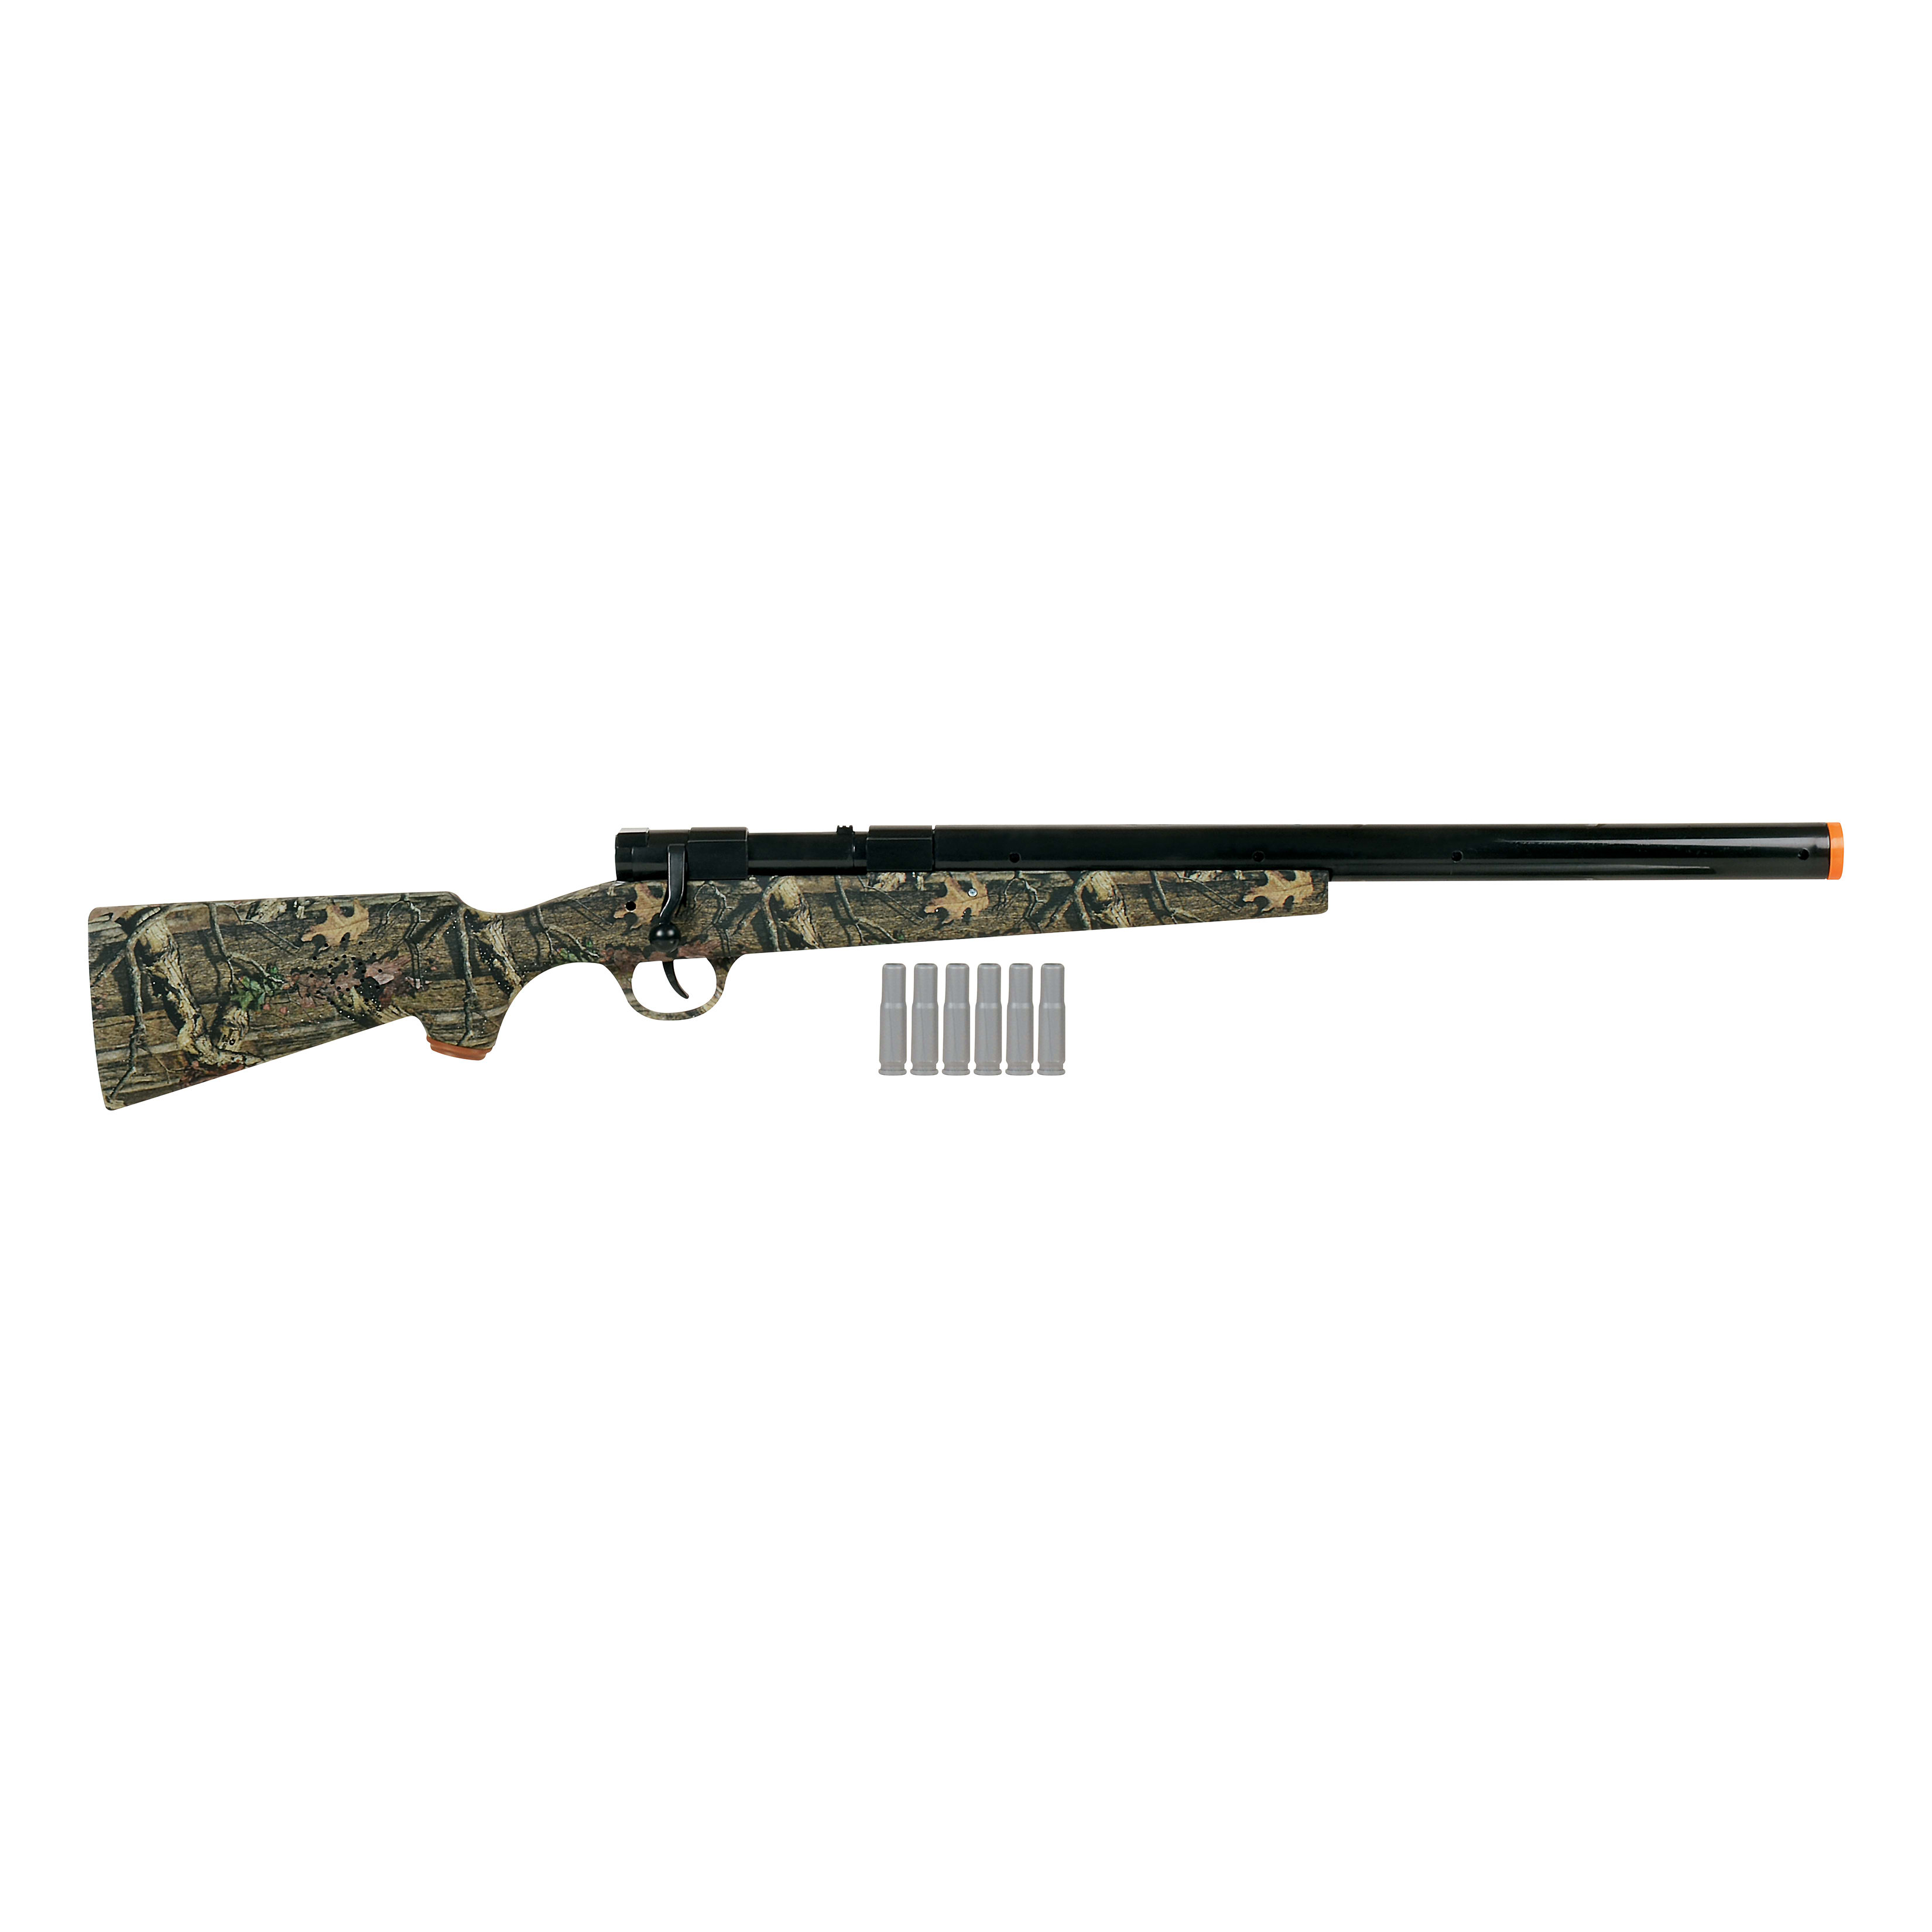 Mossy Oak Shooting Toys - Bolt Action Rifle